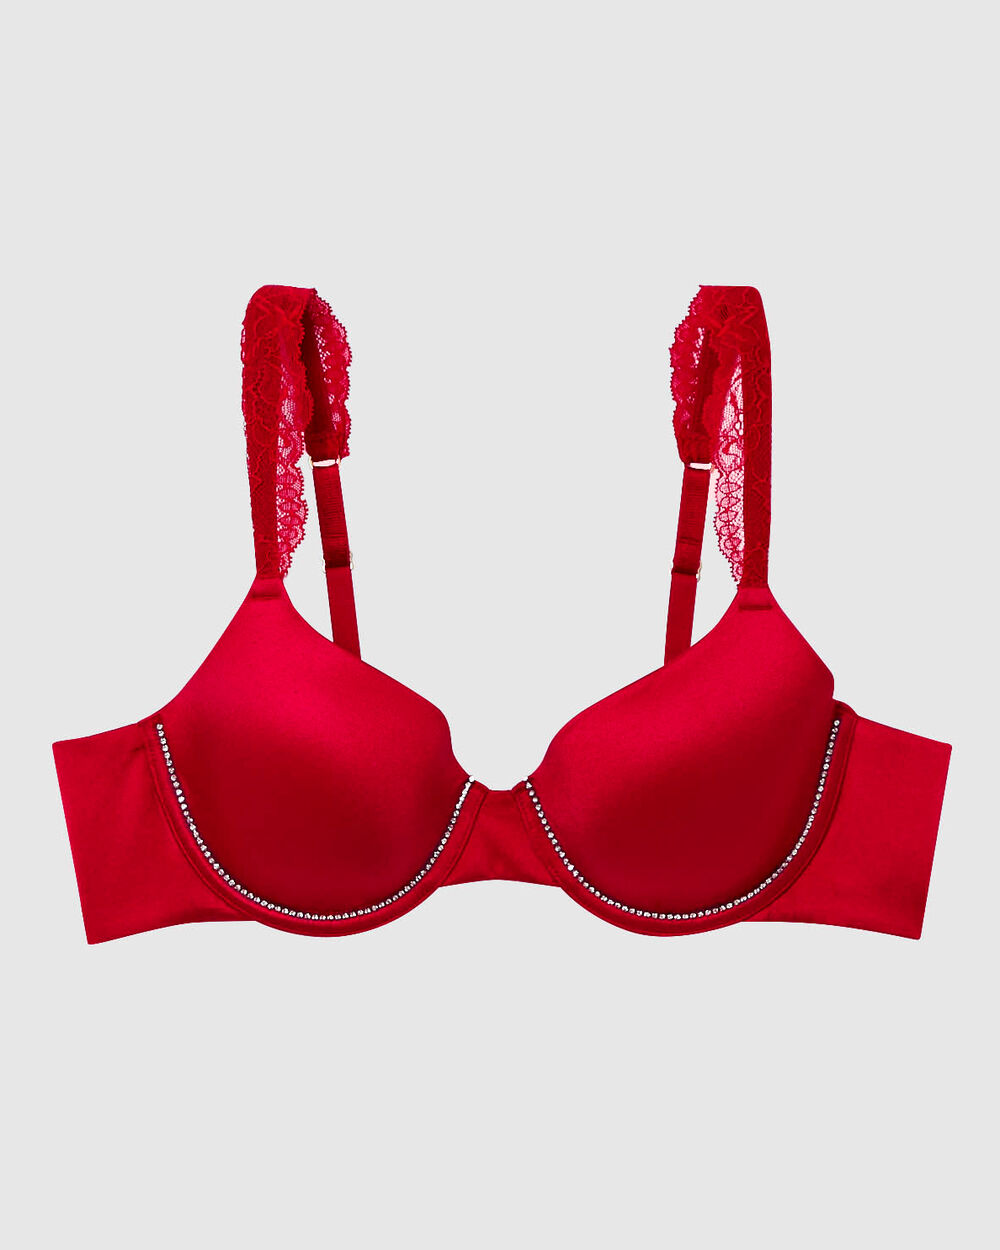 La Senza - Our lightly lined So Free bras in your favourite